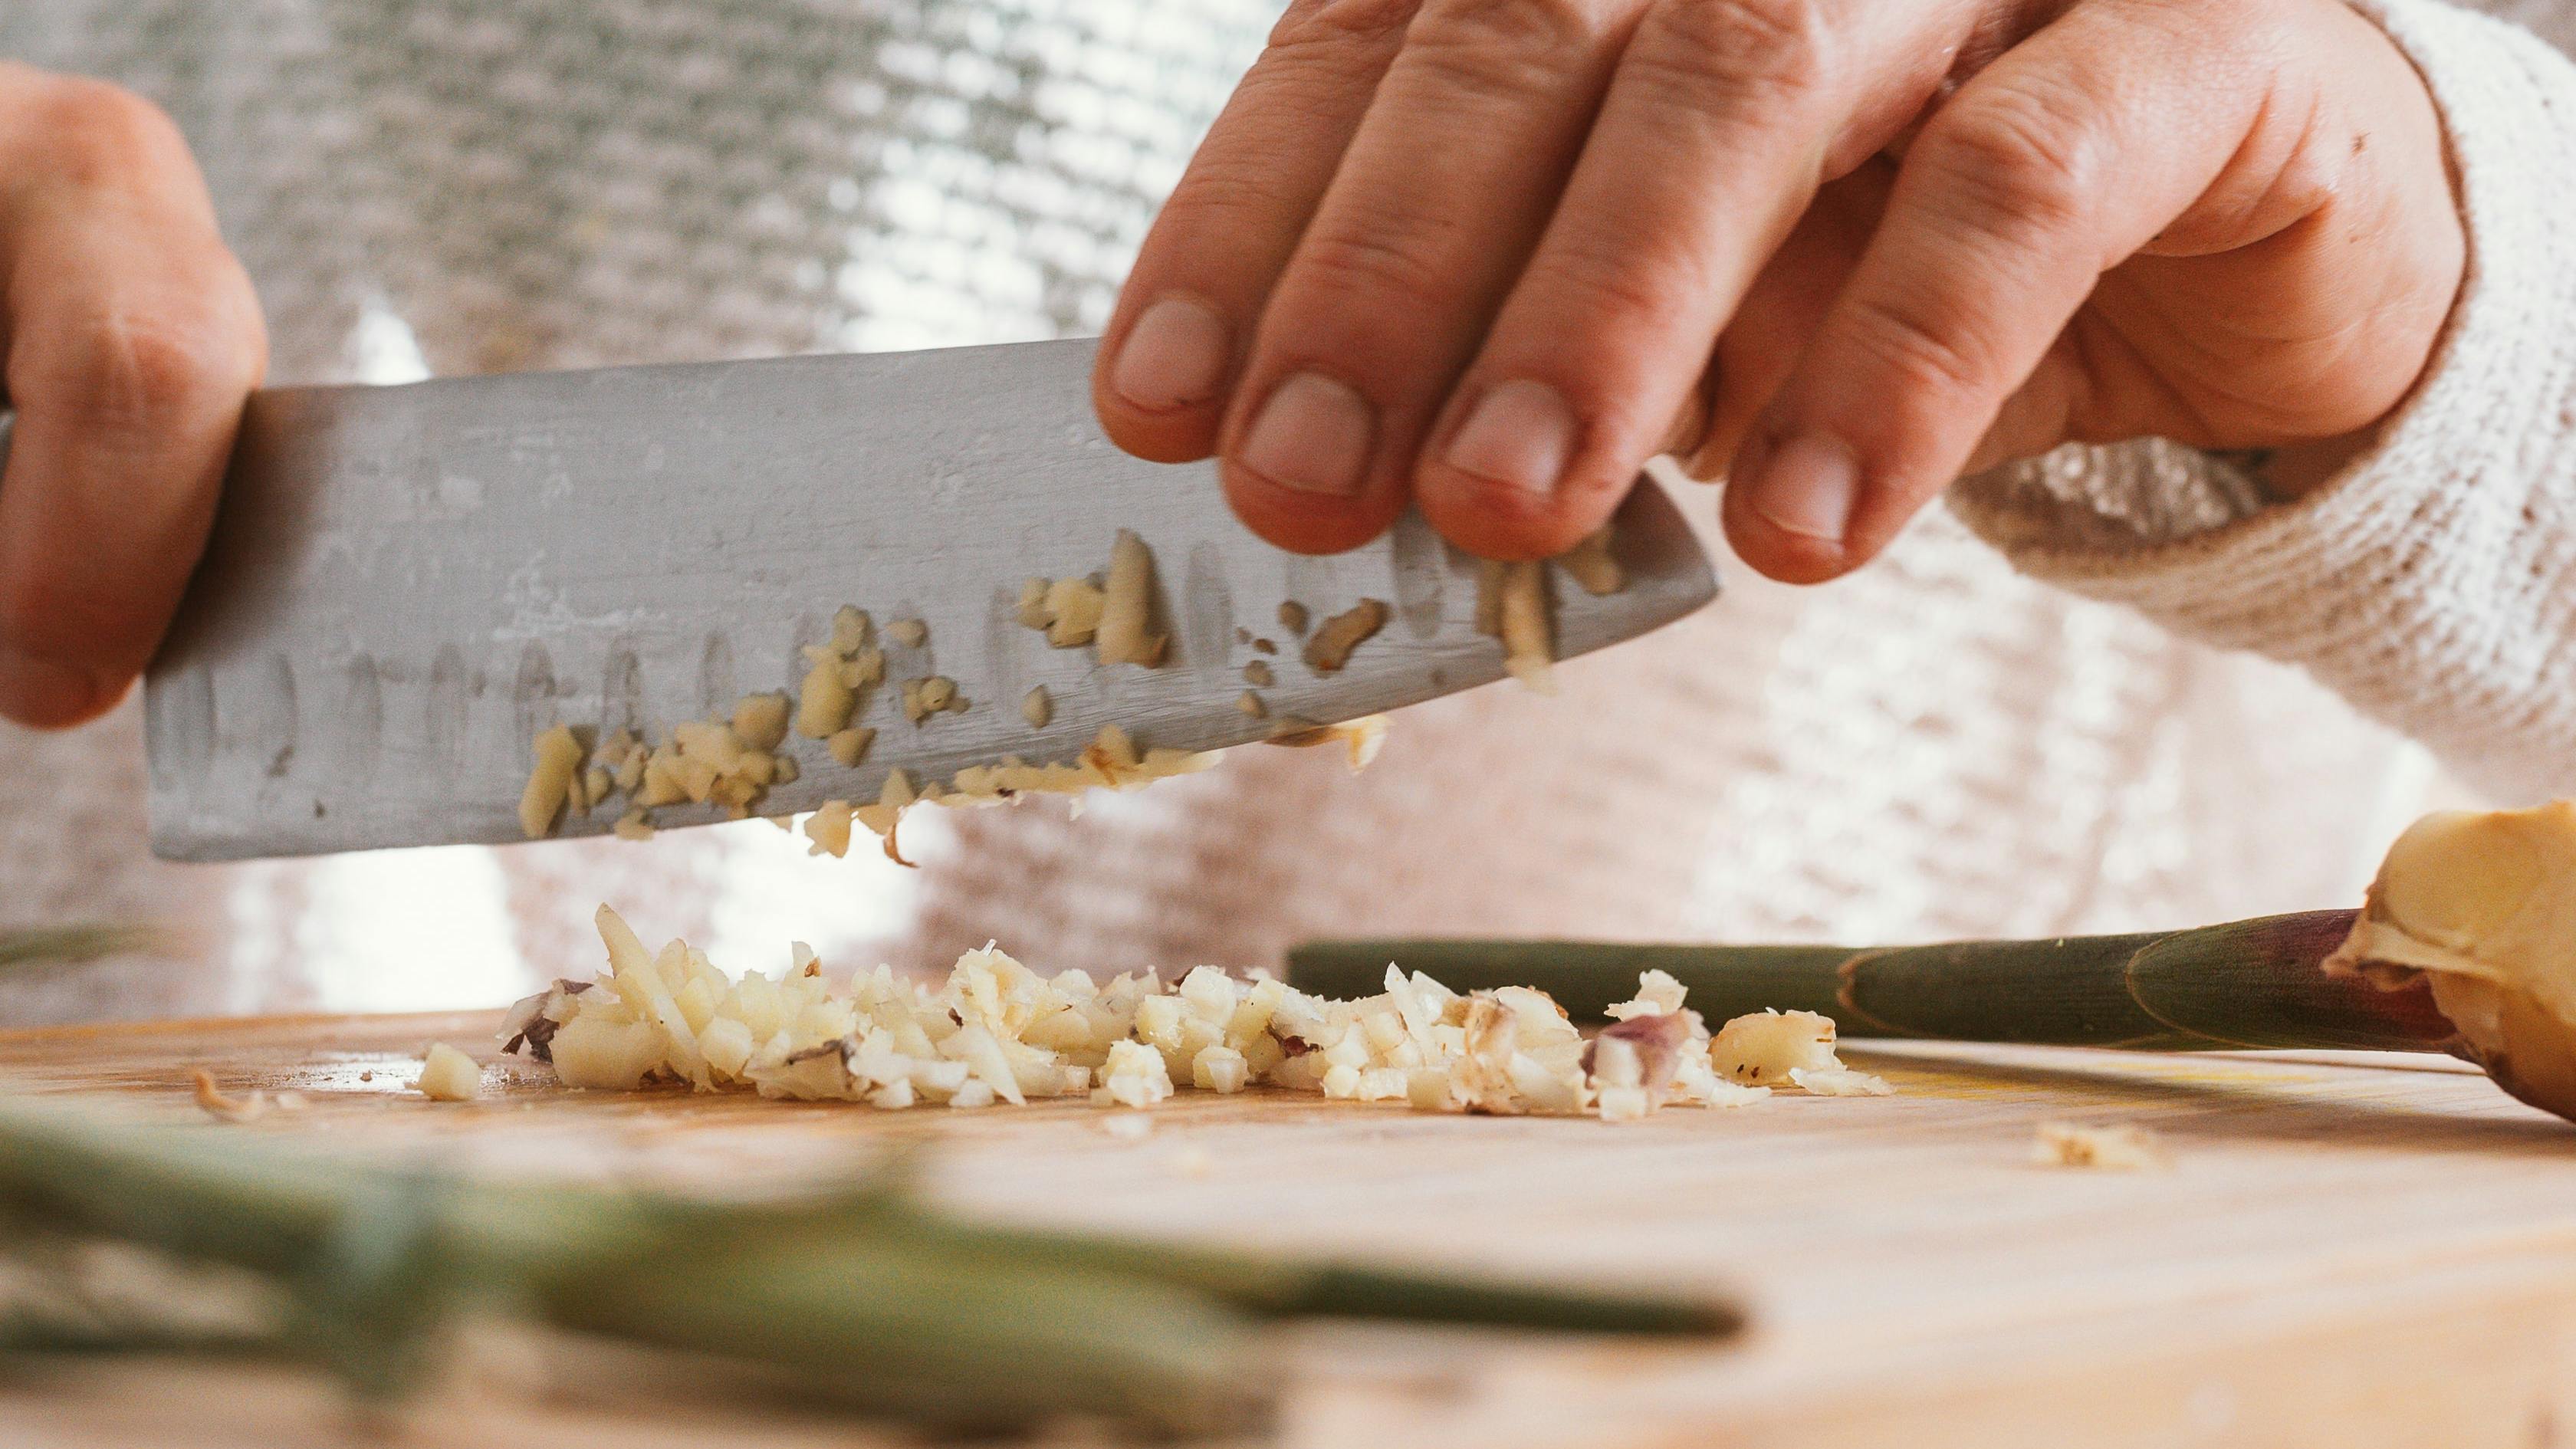 Someone chopping garlic with a knife.